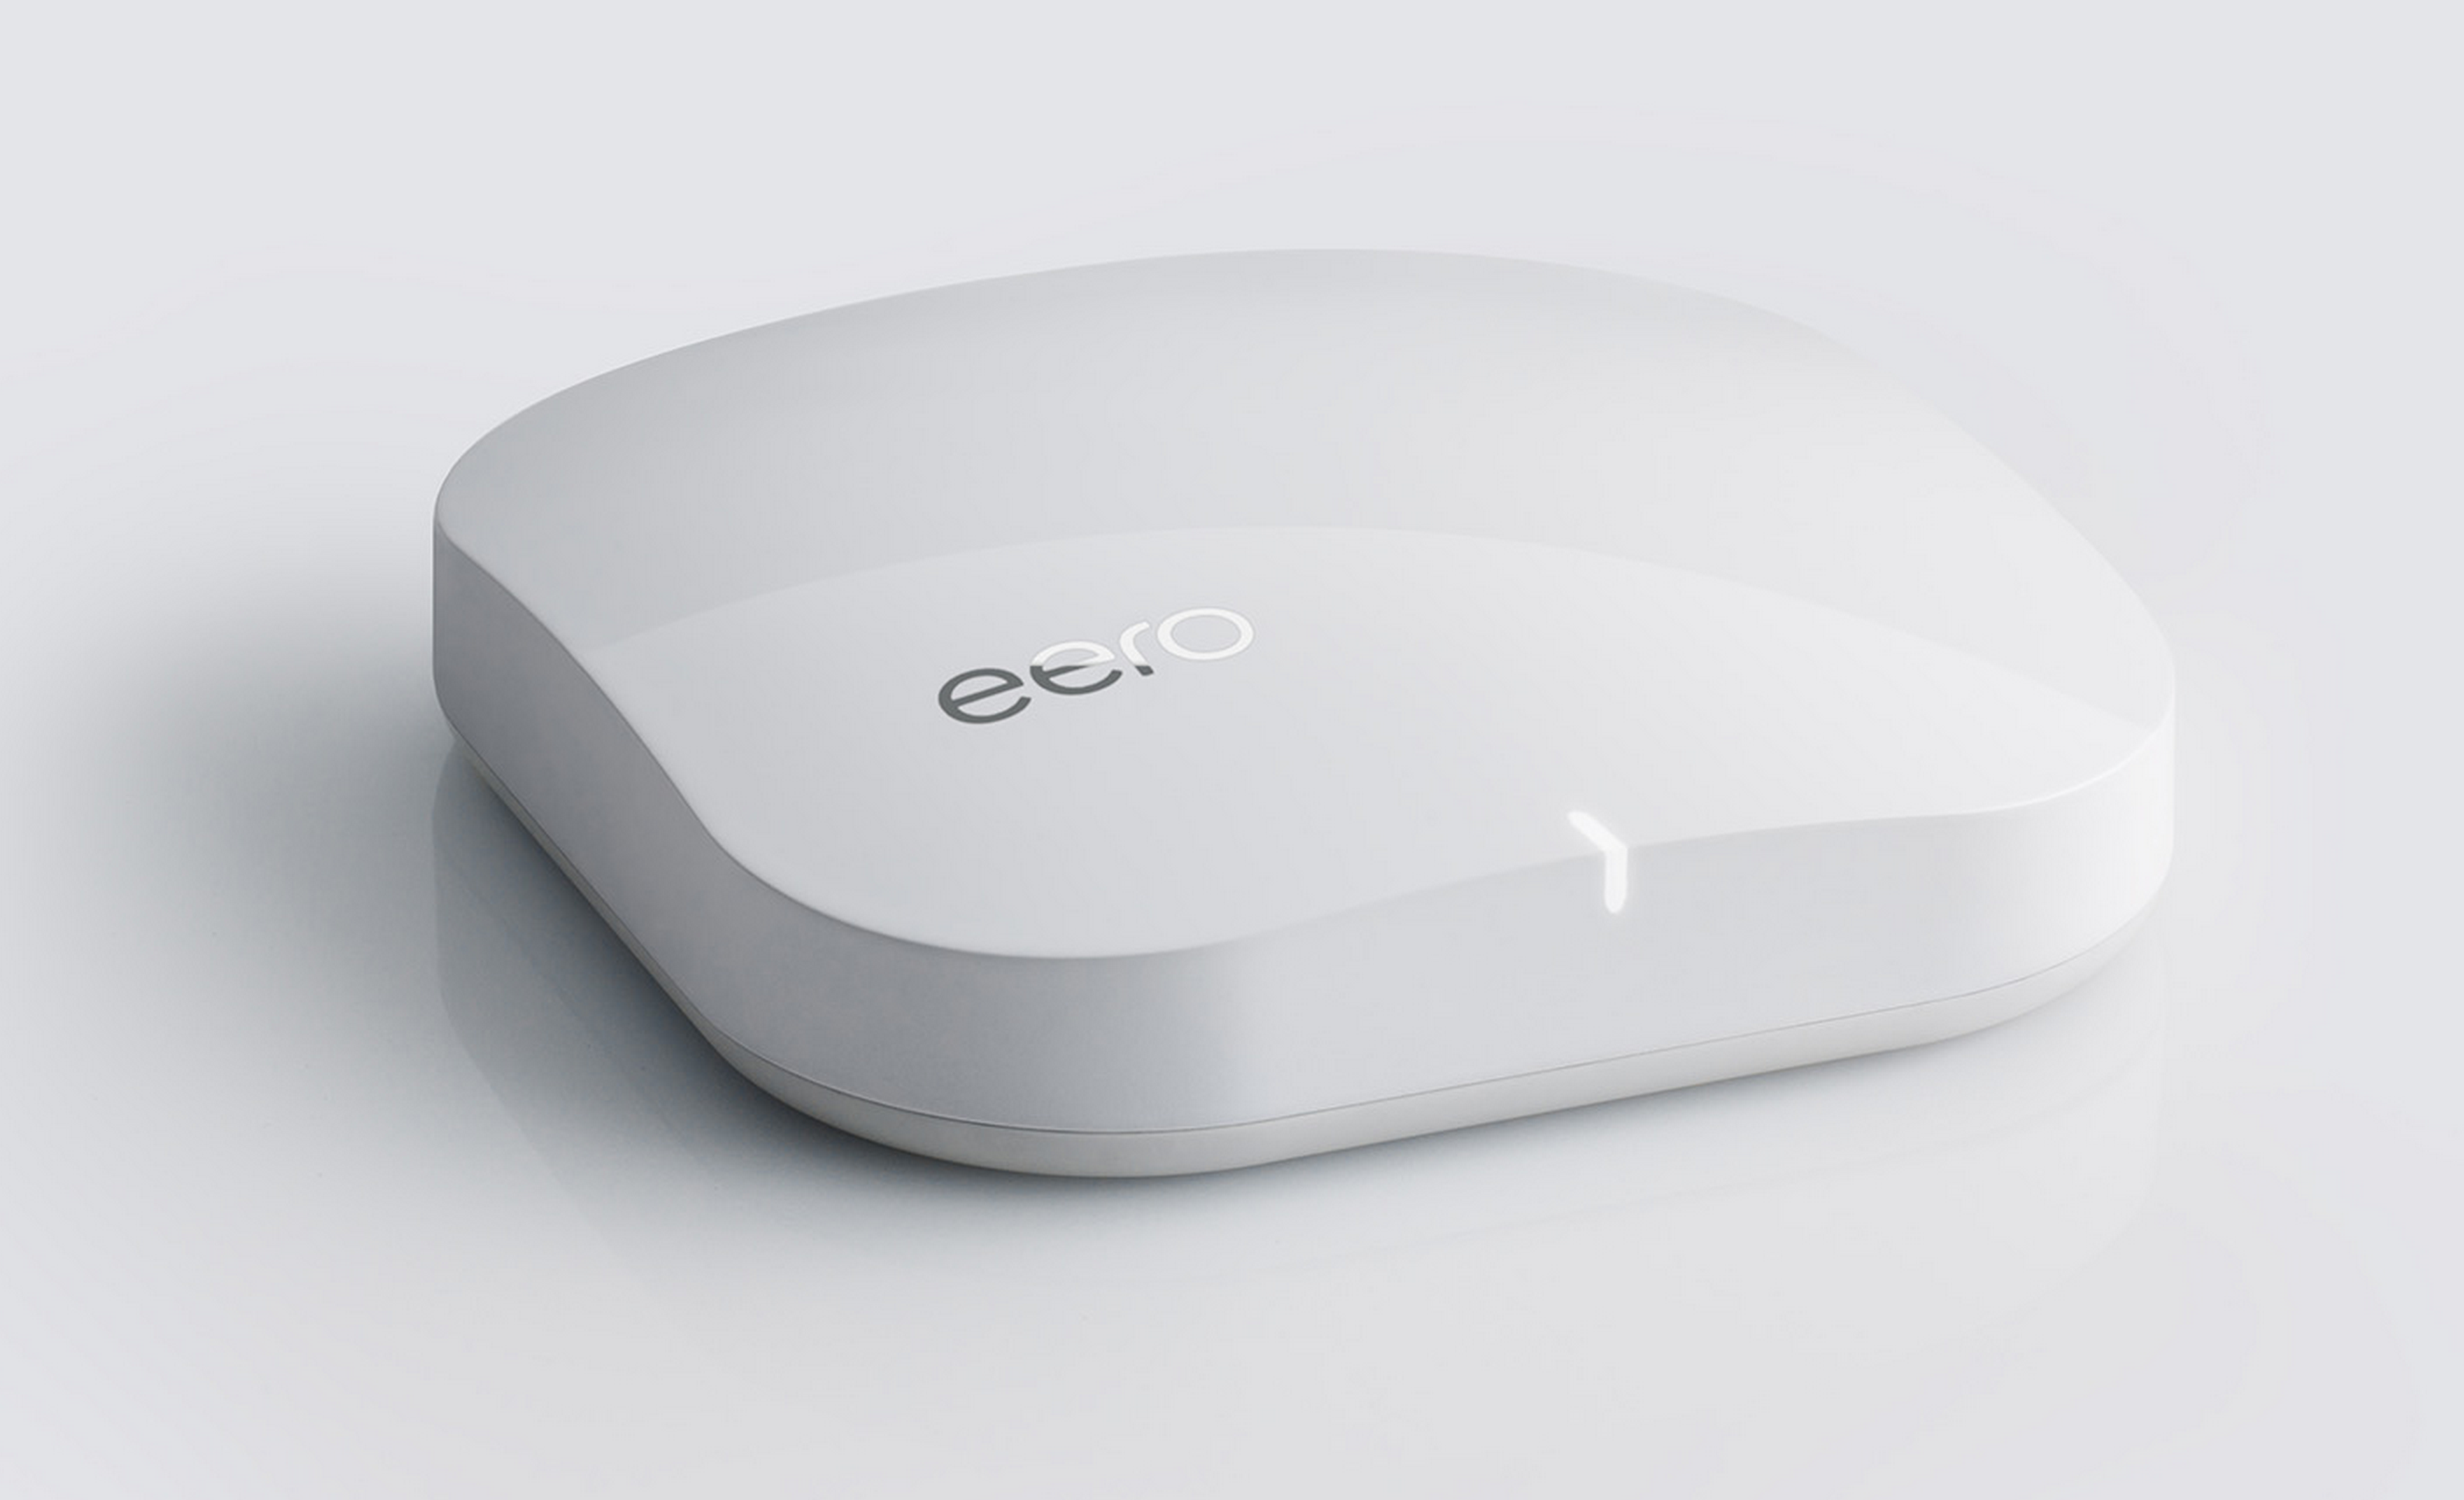 puts an eero router inside new